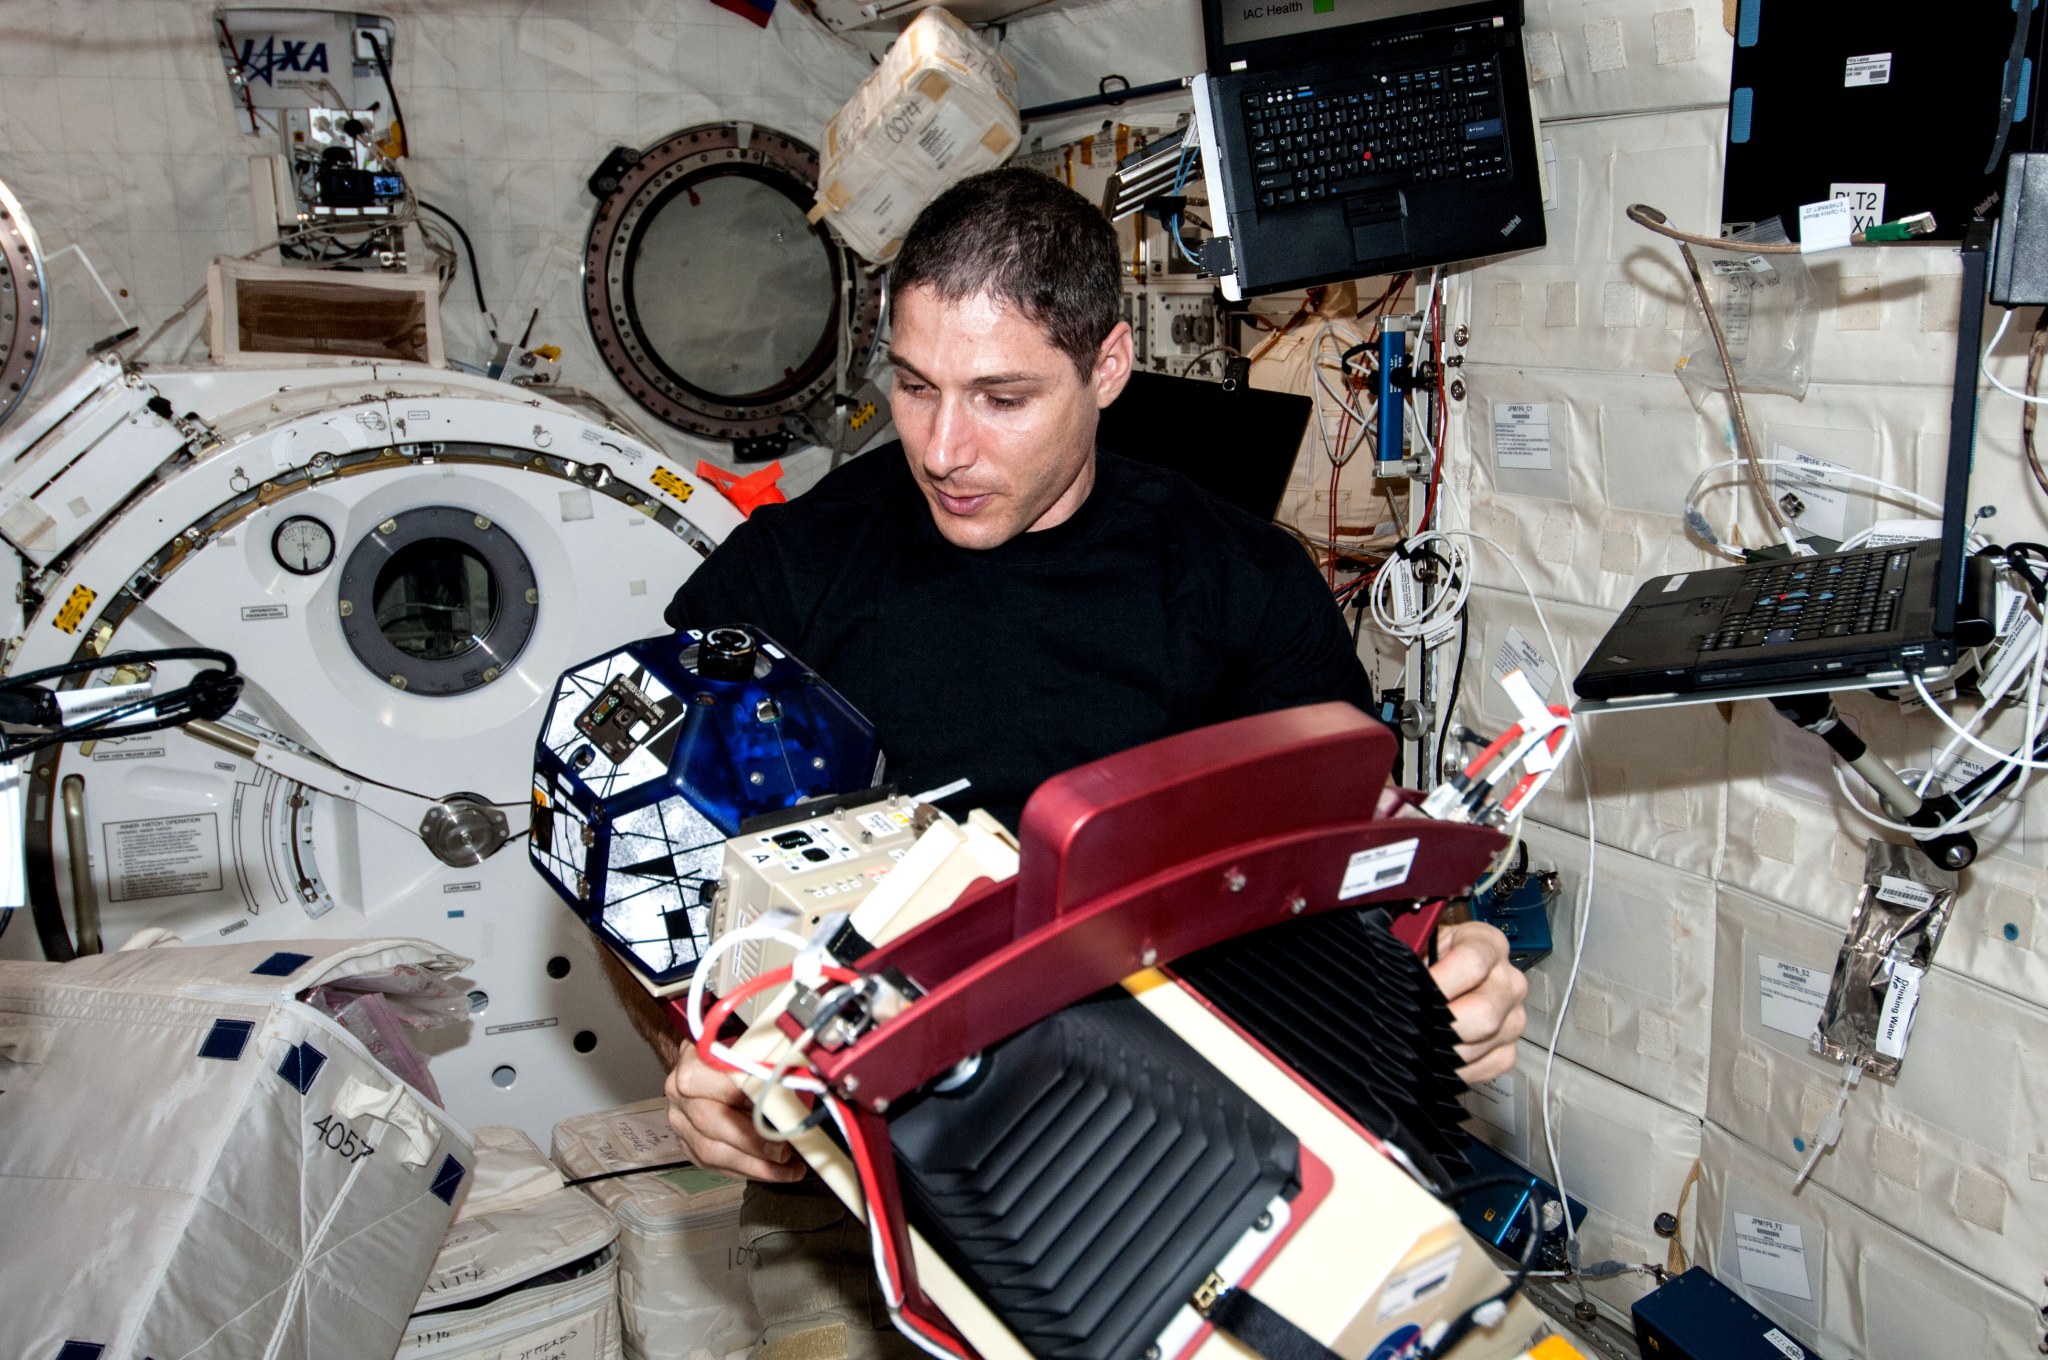 Aboard the International Space Station on Jan. 22, 2014, Expedition 38 flight engineer Mike Hopkins works with the Slosh experiment.